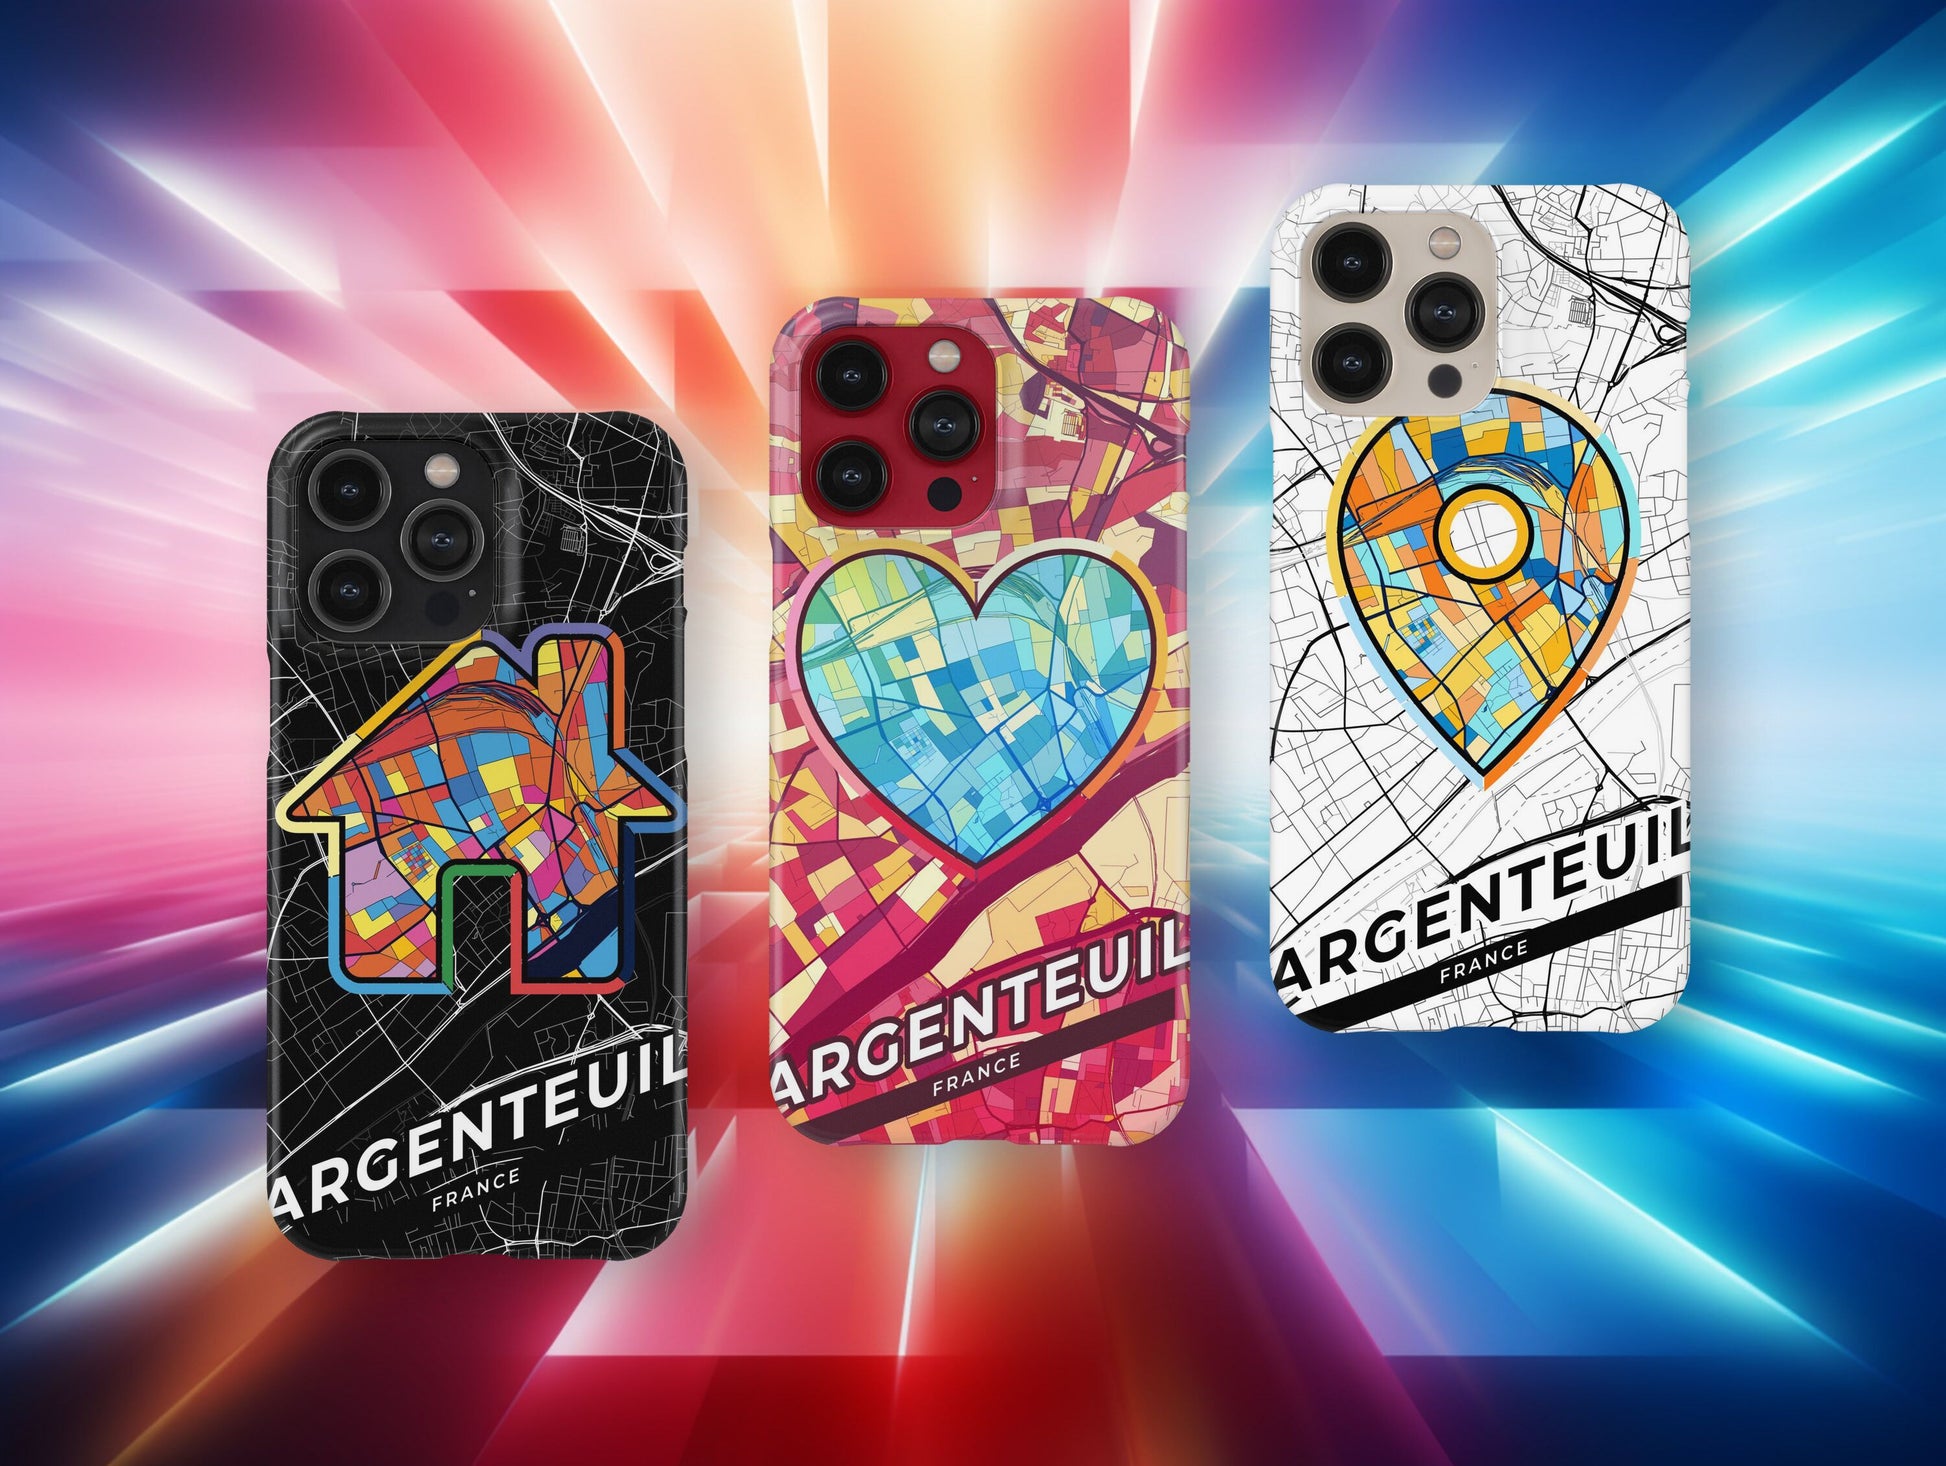 Argenteuil France slim phone case with colorful icon. Birthday, wedding or housewarming gift. Couple match cases.